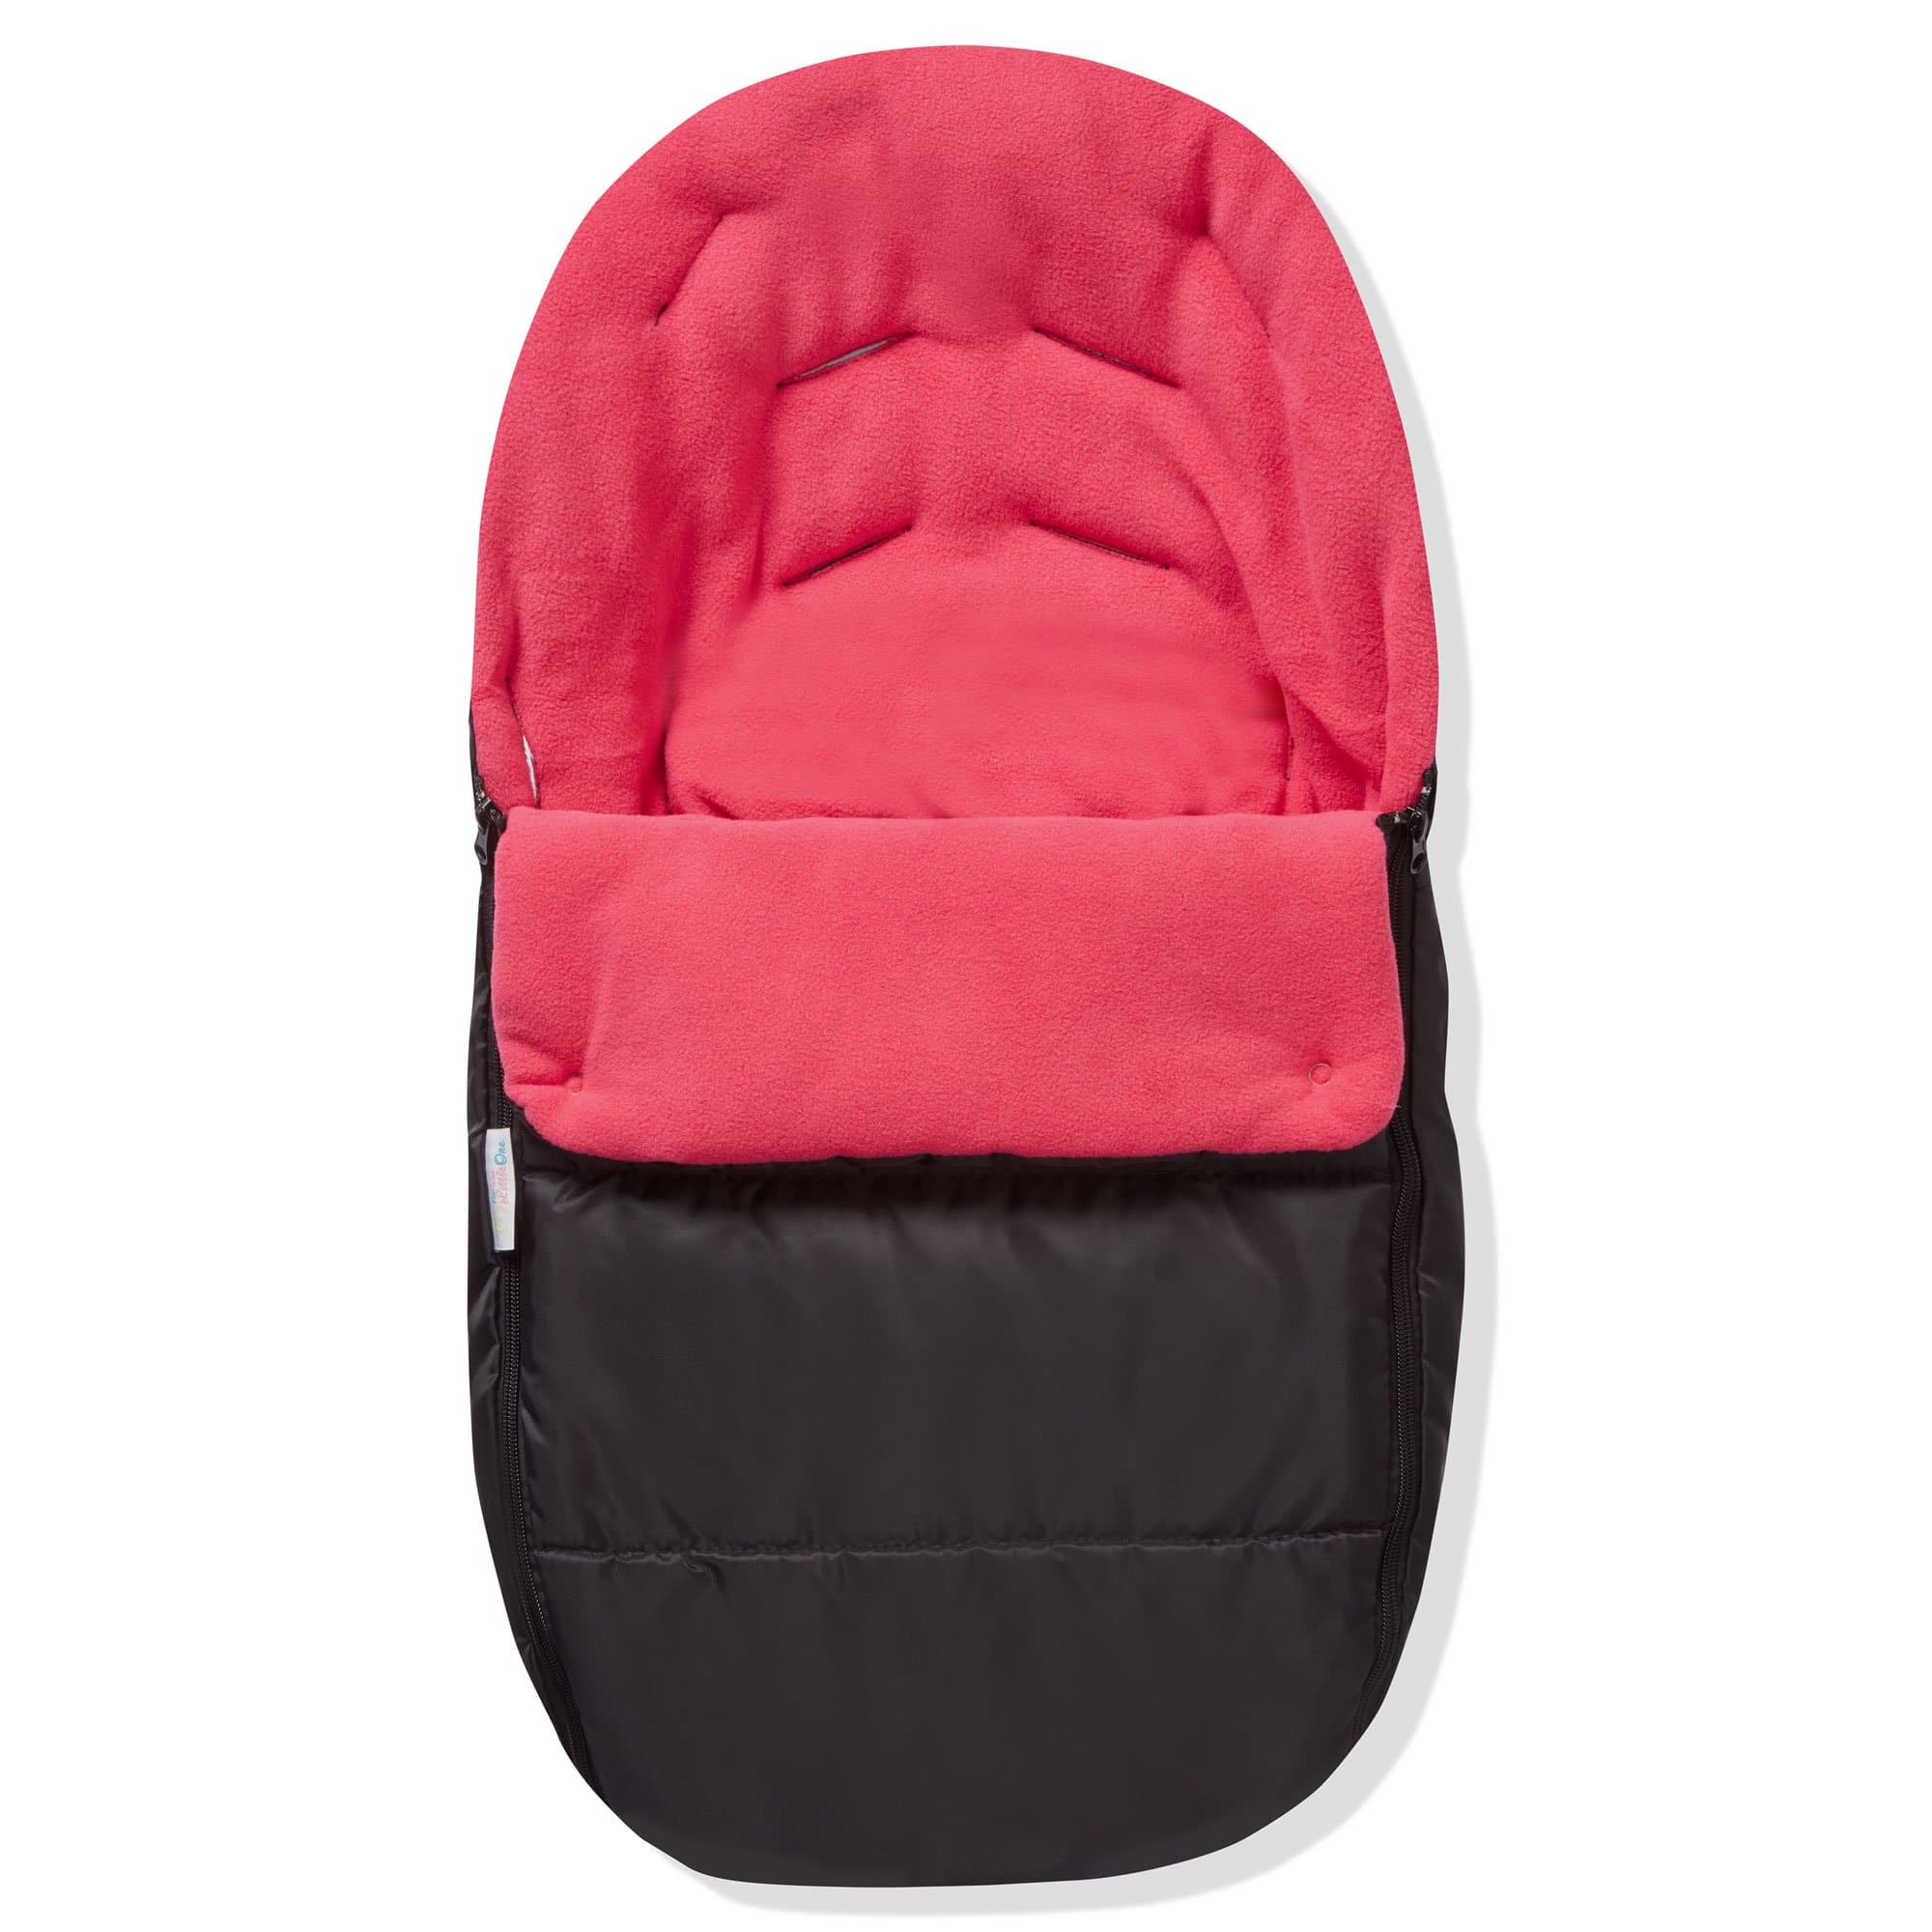 Premium Car Seat Footmuff / Cosy Toes Compatible With Baby Jogger - Pink Rose / Fits All Models | For Your Little One